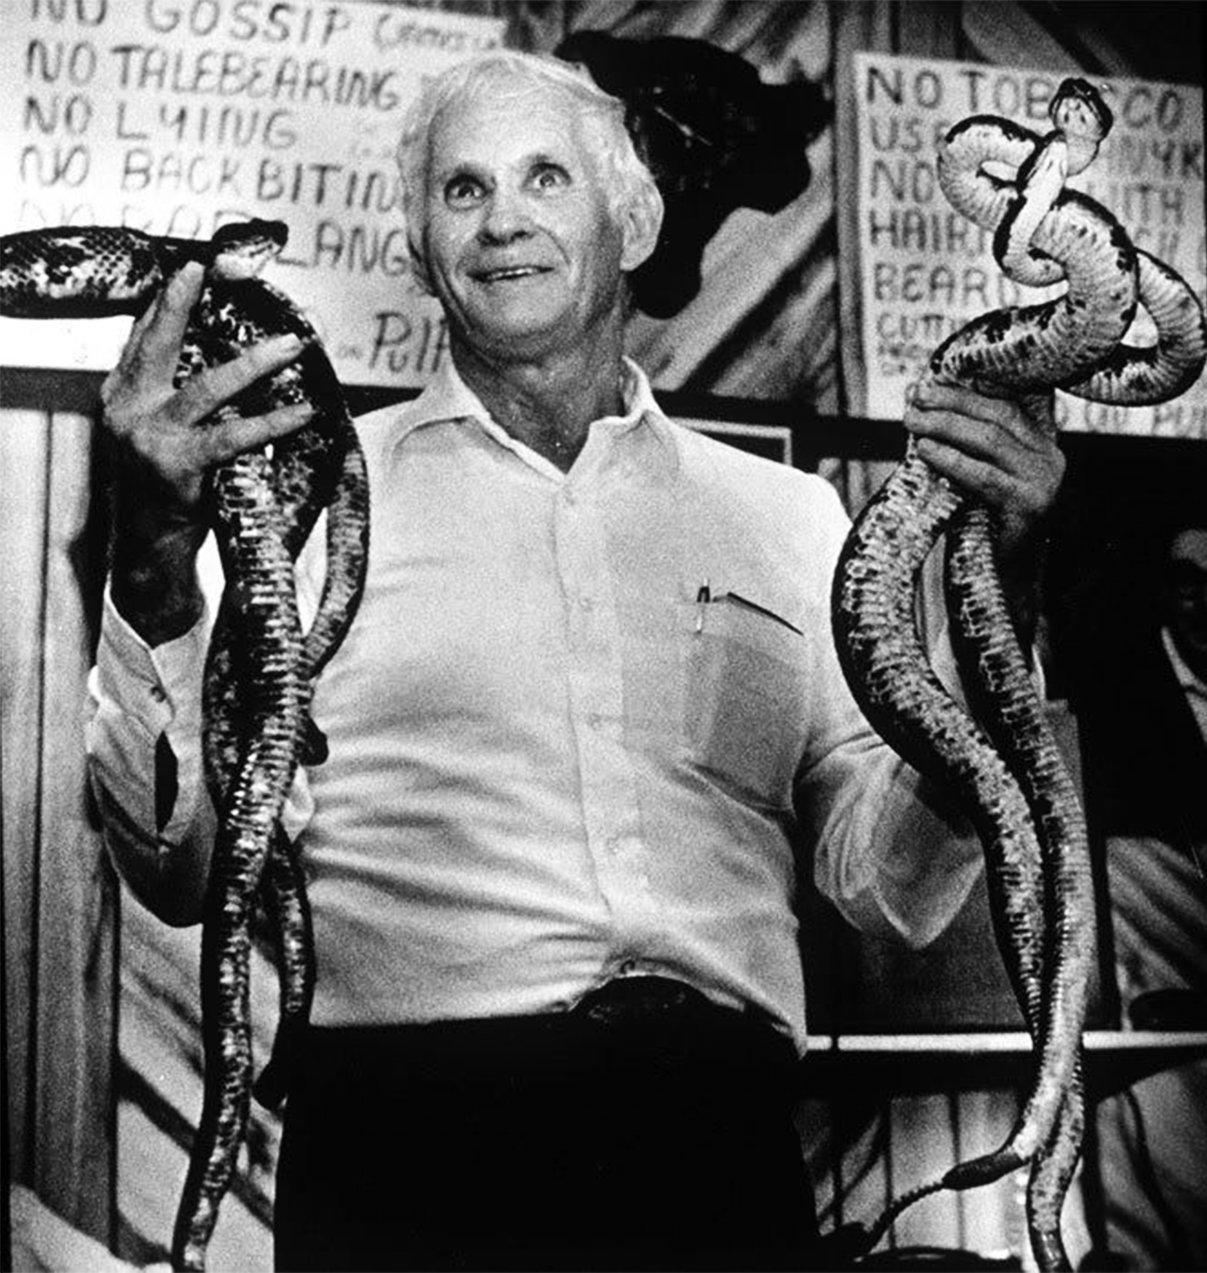 Black and white photograph of George Hensley with white hair, looking upwards while holding large serpents in his hands. Behind him, a board displays various church rules such as 'No Gossip' and 'No Tobacco'.